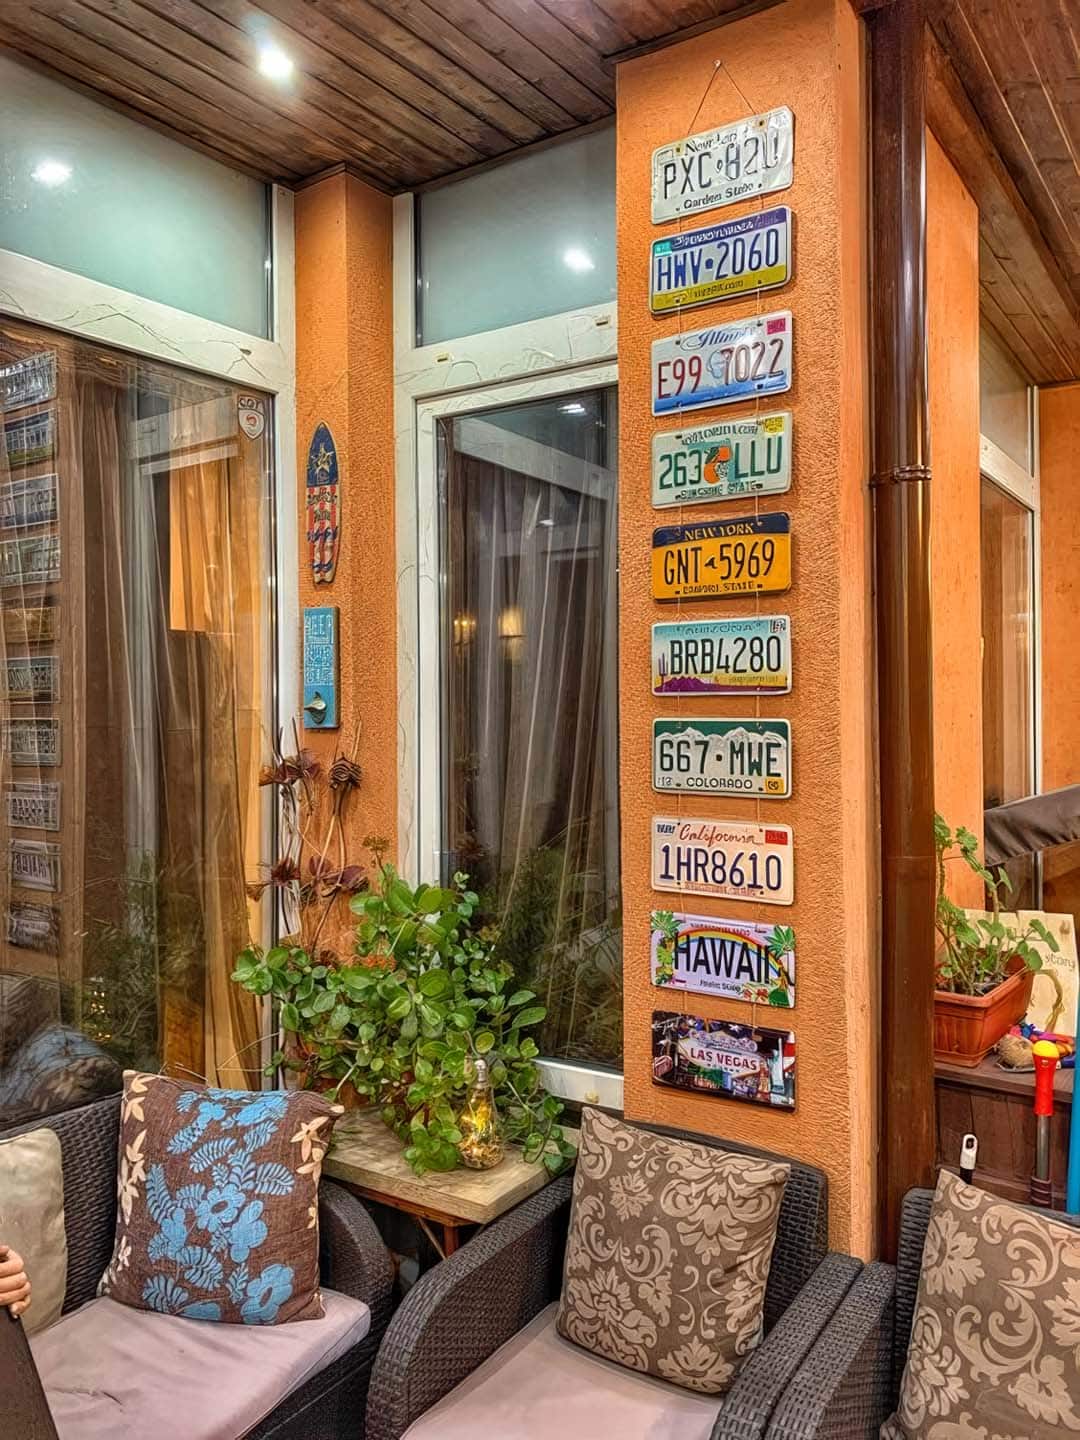 License plates hanging on living room wall